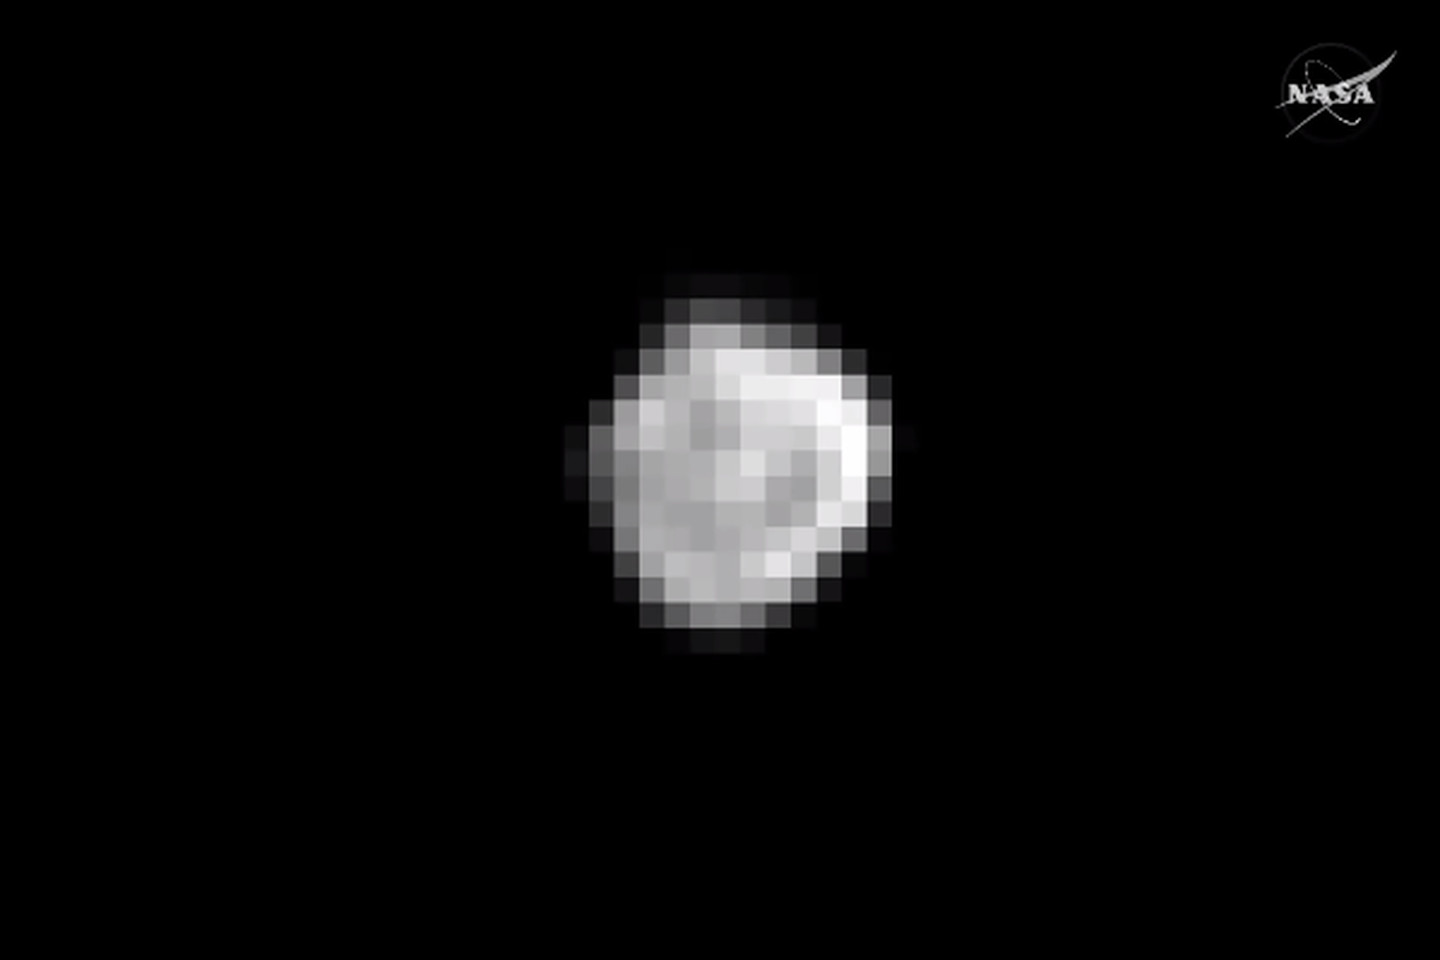 New Horizons Captures First Close Up Image Of Plutos Moon Nix The Verge